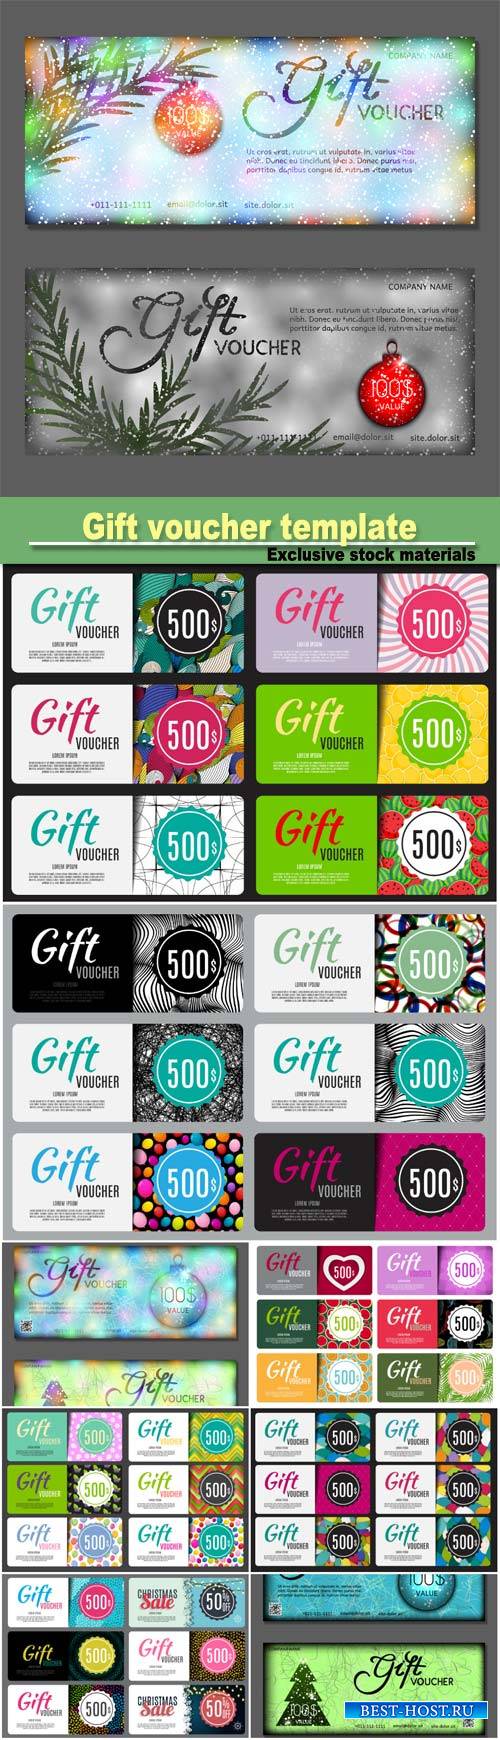 Gift voucher template, vector illustration for your business